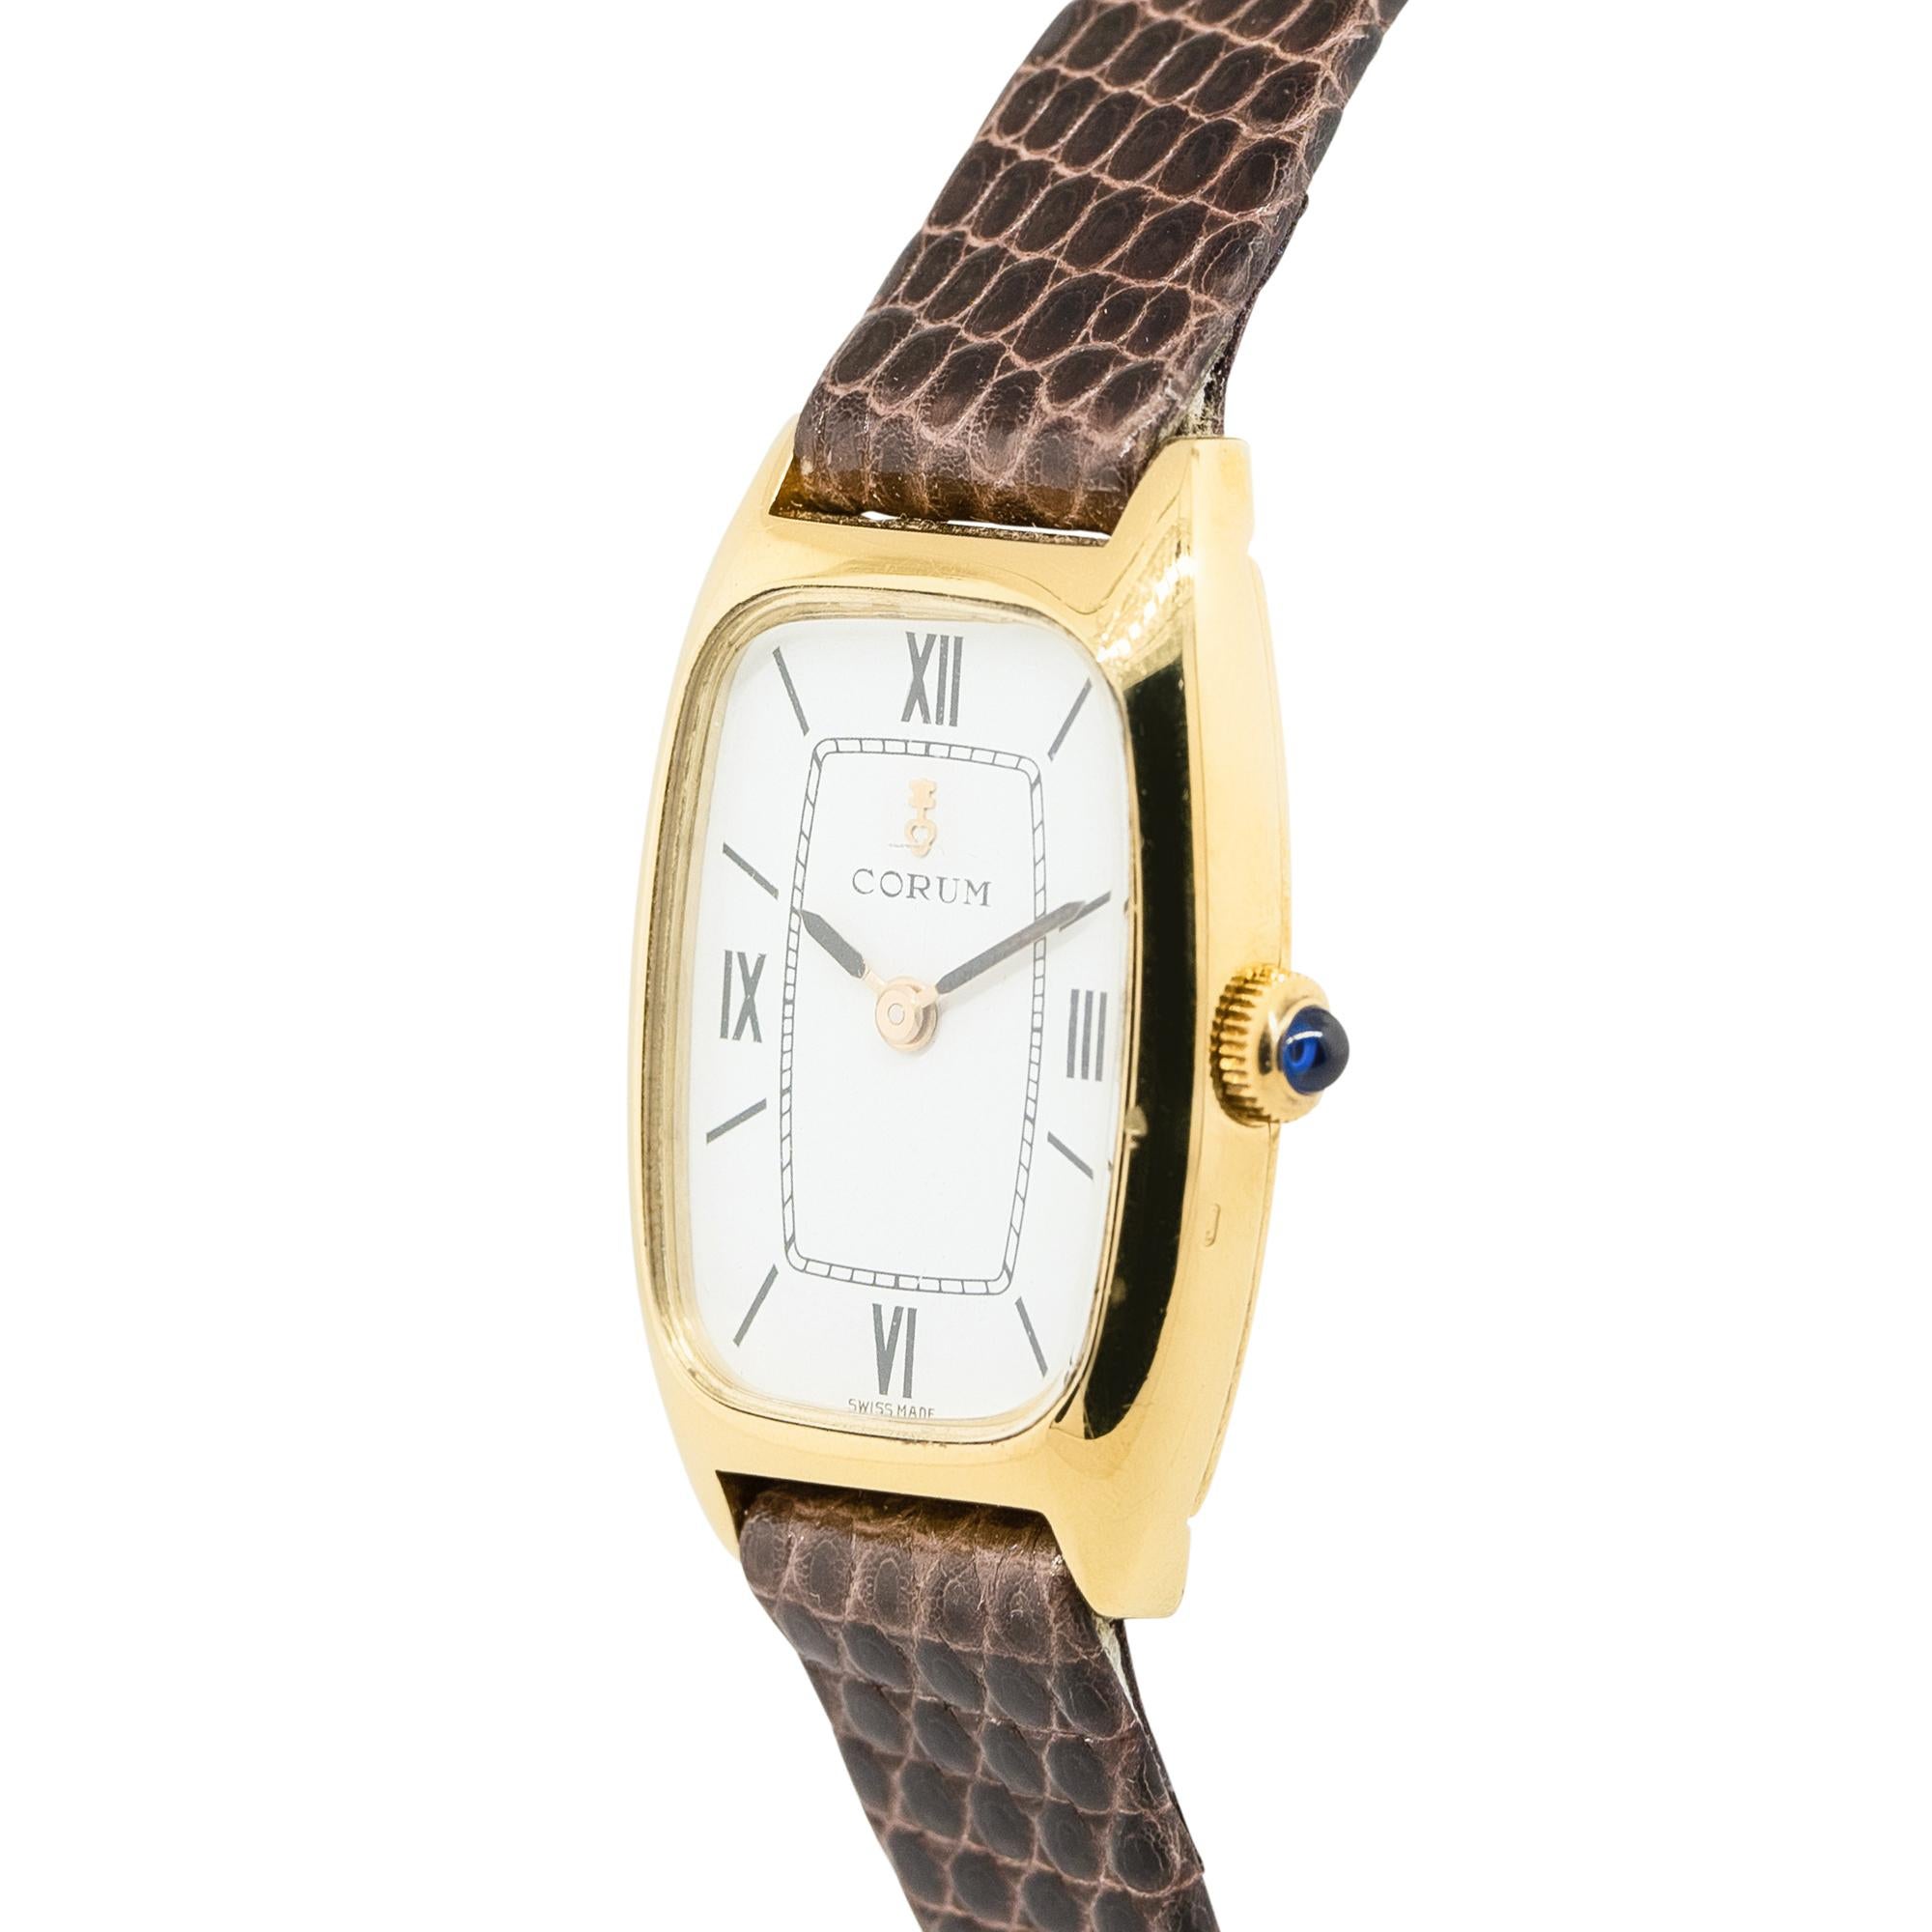 Brand: Corum
Reference: 173624
Case Material: 18k Yellow Gold Case
Case size: 21mm x 6.5mm x 27mm
Dial: White Dial with Black Roman Numerals
Bezel: 18k Yellow Gold
Bracelet: Brown Lizard 2 Piece Strap
Movement: Quartz
Size: Will fit a 7